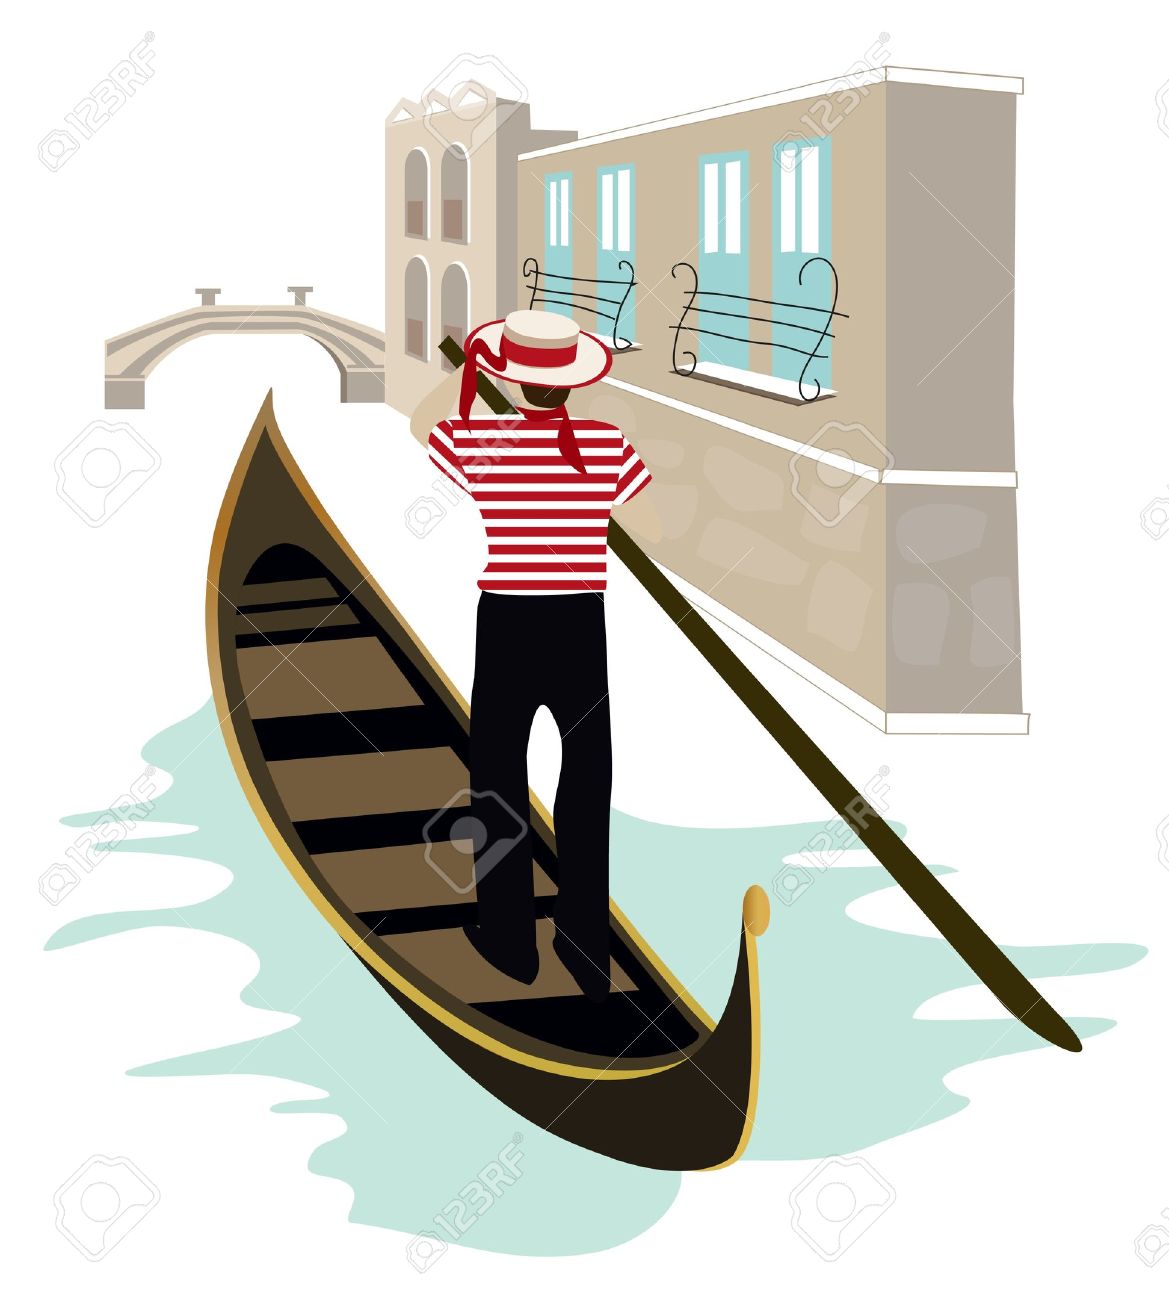 free clipart canal boat - photo #31